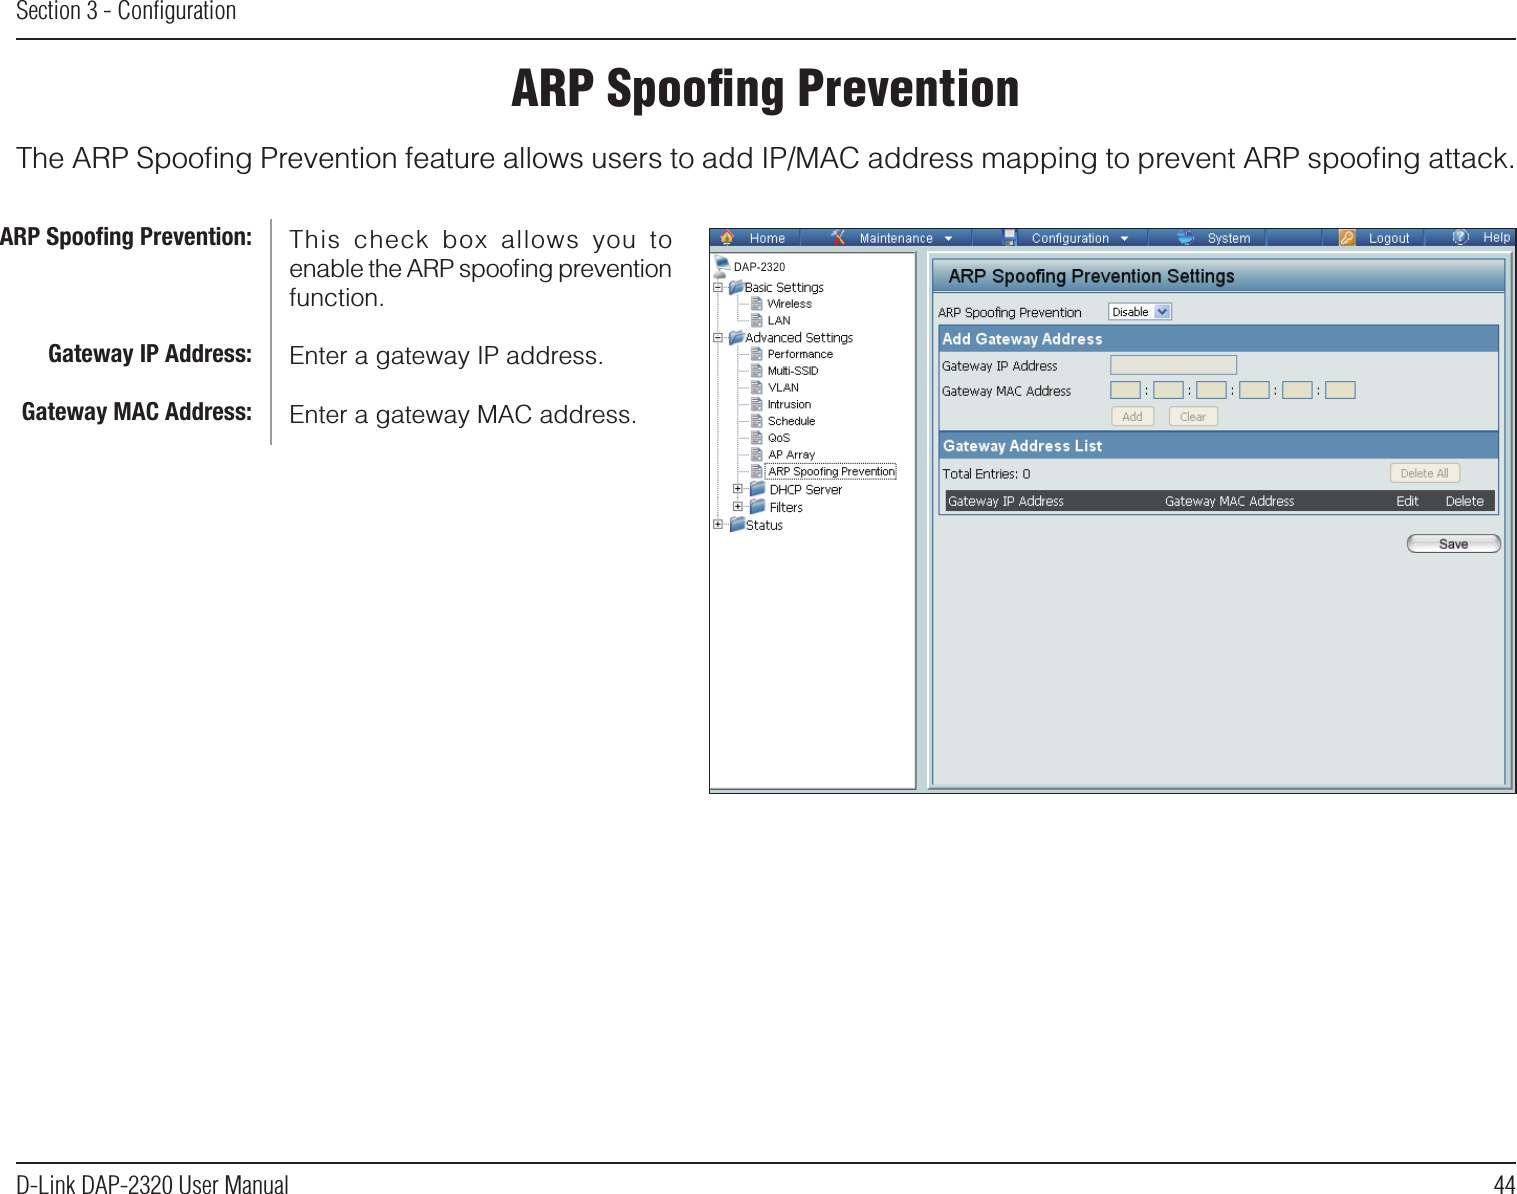 44D-Link DAP-2320 User ManualSection 3 - ConﬁgurationARP Spooﬁng PreventionThe ARP Spooﬁng Prevention feature allows users to add IP/MAC address mapping to prevent ARP spooﬁng attack.This  check  box  allows  you  to enable the ARP spooﬁng prevention function.Enter a gateway IP address.Enter a gateway MAC address.ARP Spooﬁng Prevention:Gateway IP Address:Gateway MAC Address:DAP-2320